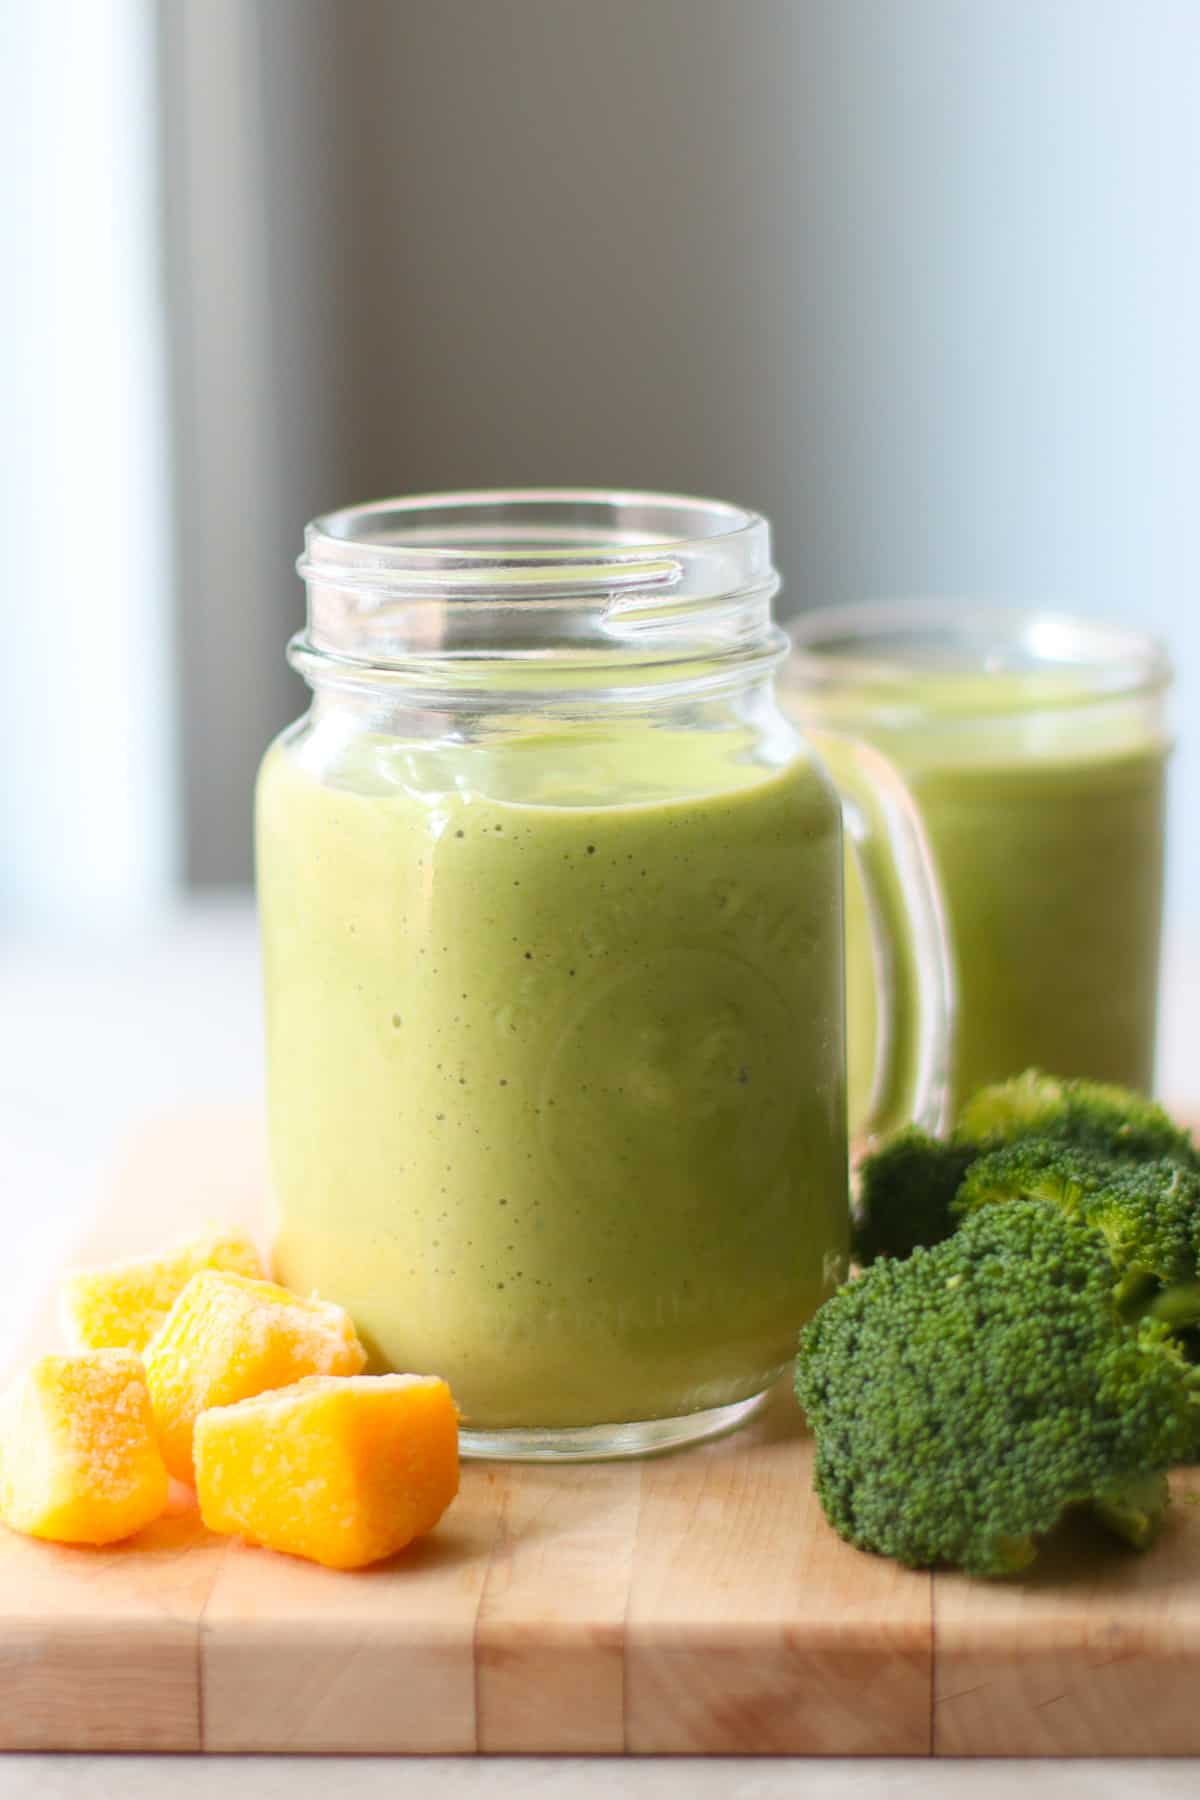 Smoothie in glass cup with mangoes and broccoli in the background.